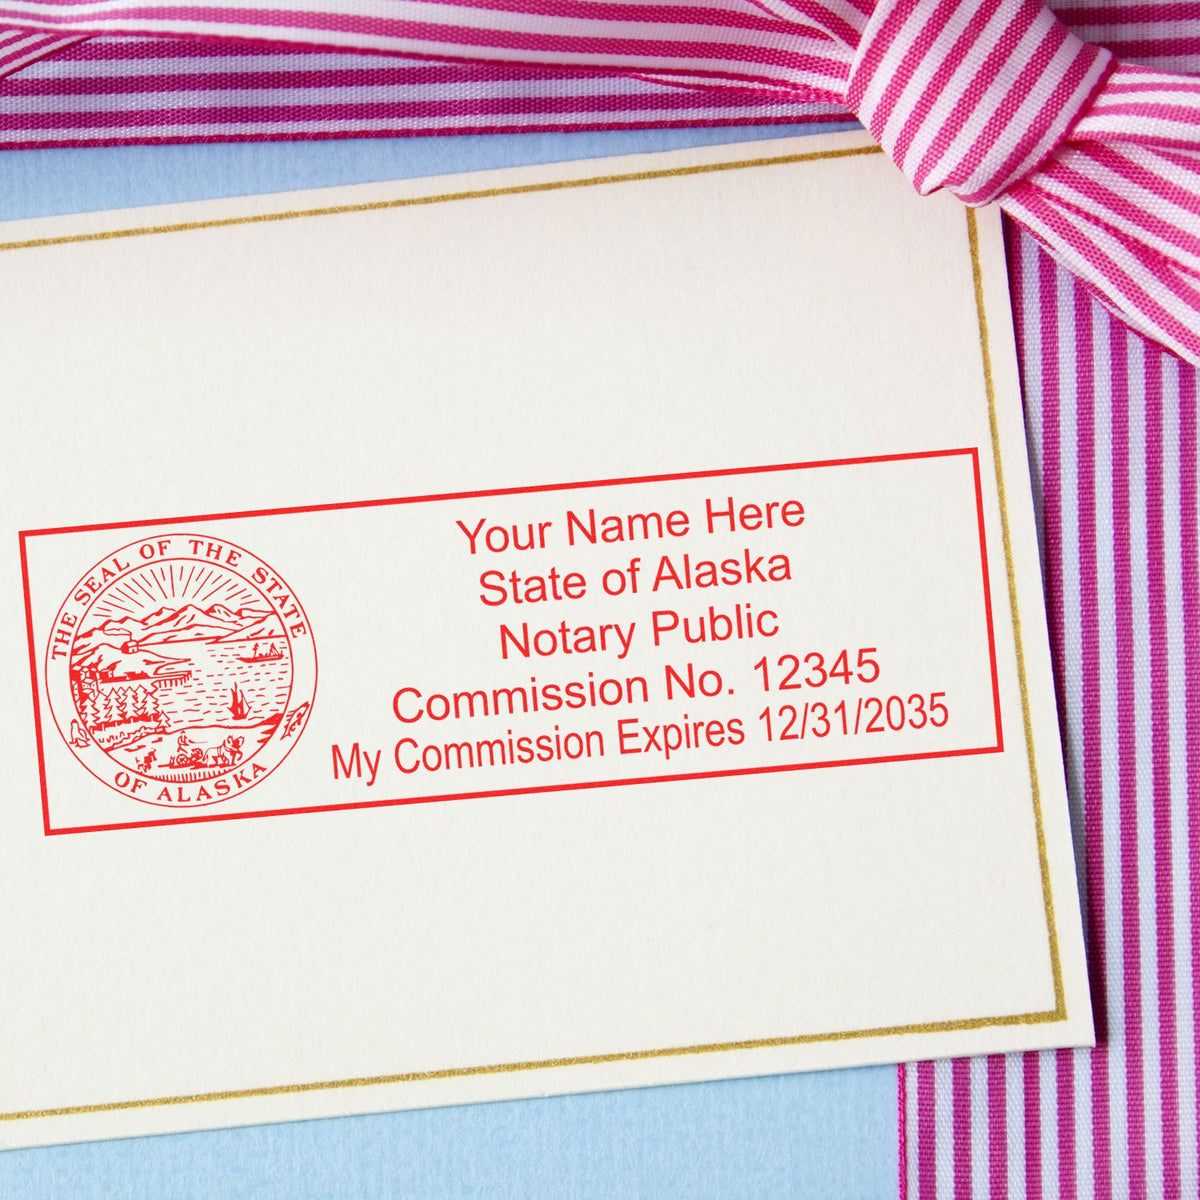 An alternative view of the MaxLight Premium Pre-Inked Alaska State Seal Notarial Stamp stamped on a sheet of paper showing the image in use